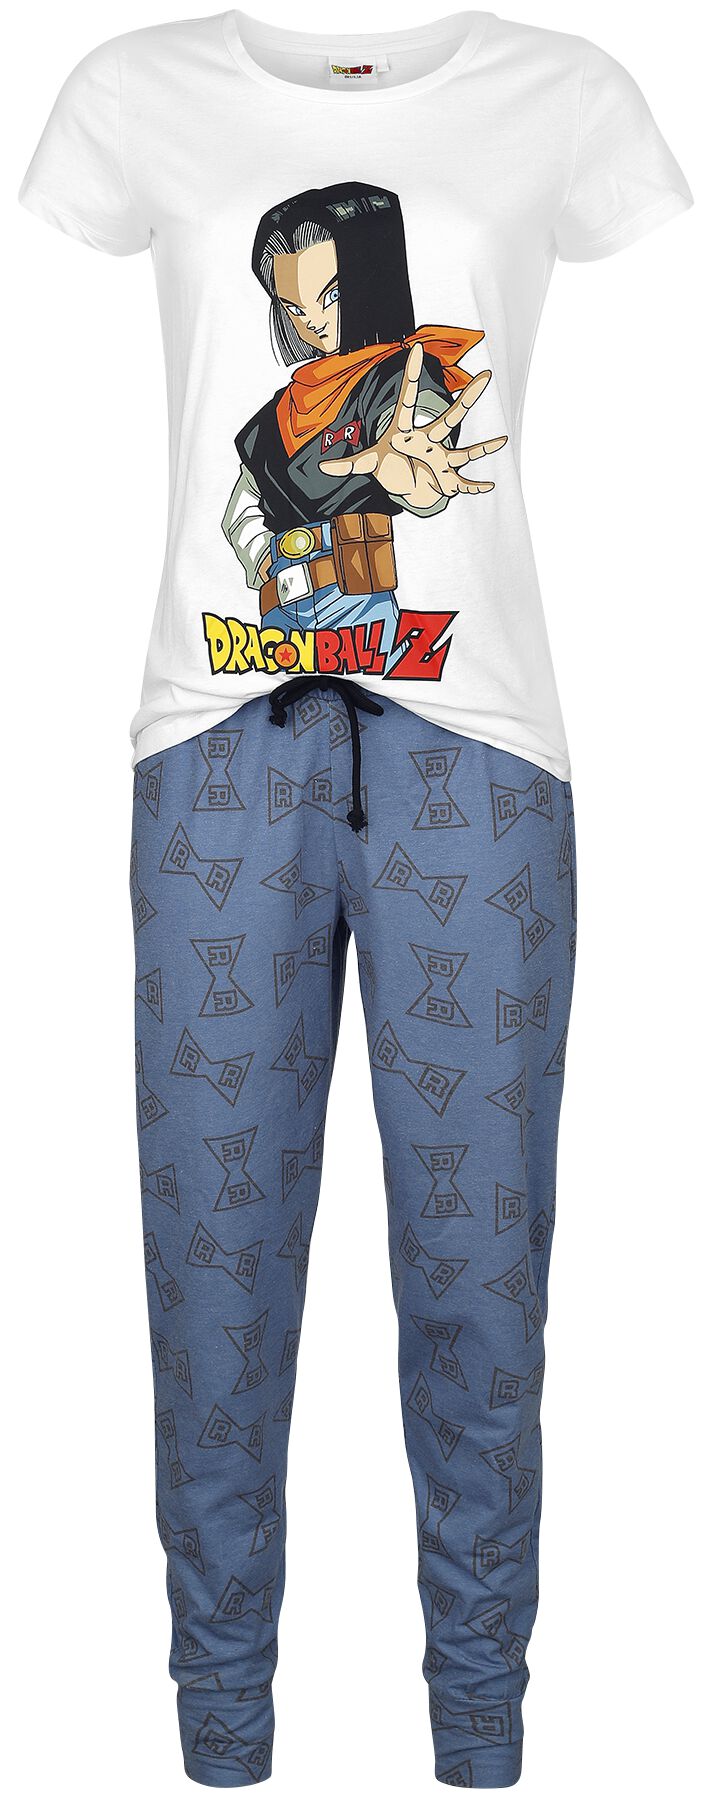 Image of Pigiama Gaming di Dragon Ball - Z - Android 17 - S a 3XL - Donna - bianco/blu